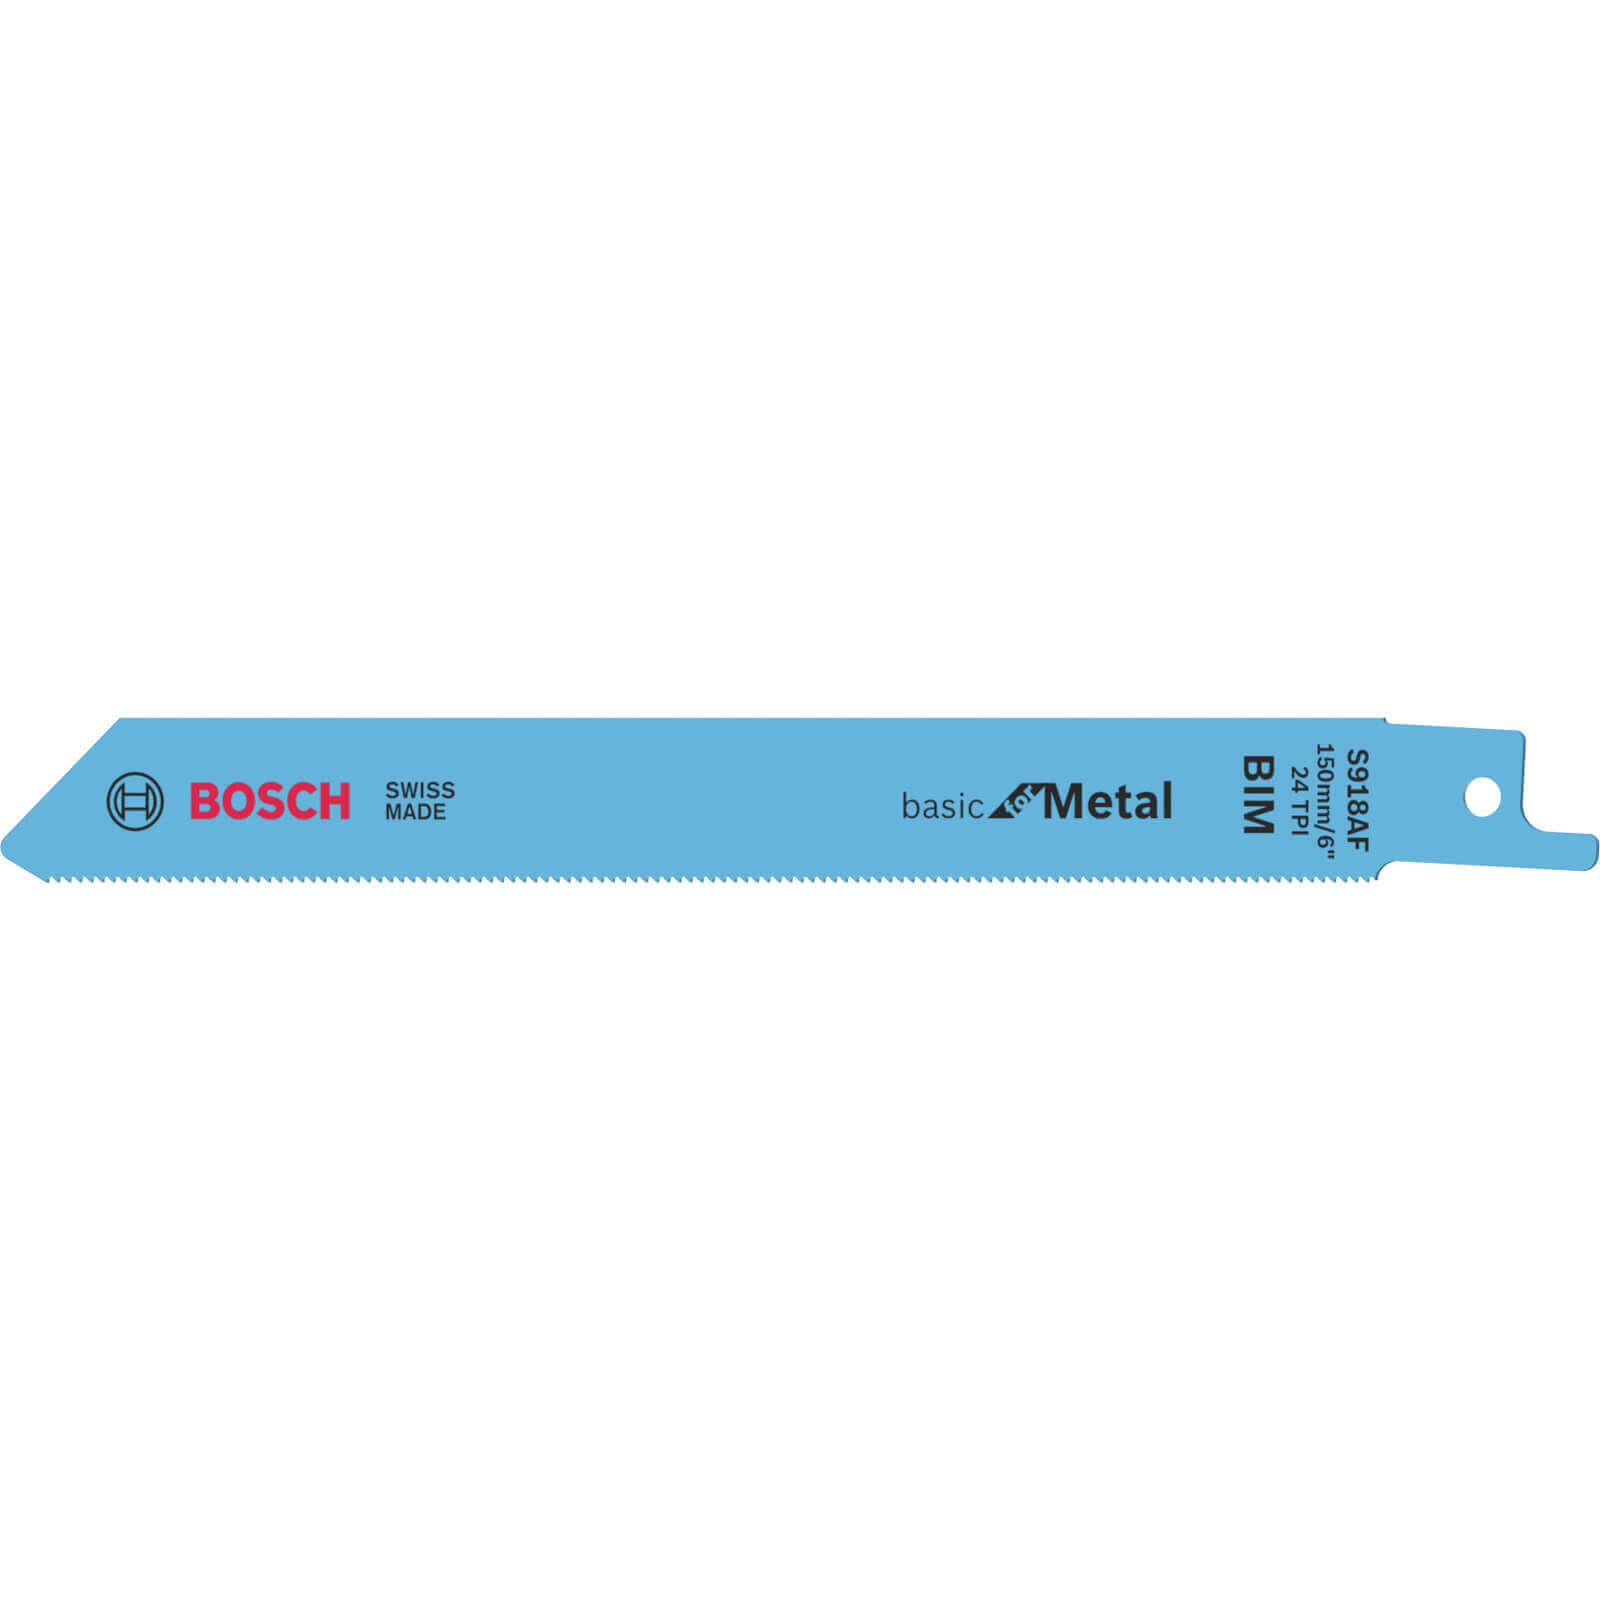 Photo of Bosch S918af Metal Cutting Reciprocating Saw Blades Pack Of 5